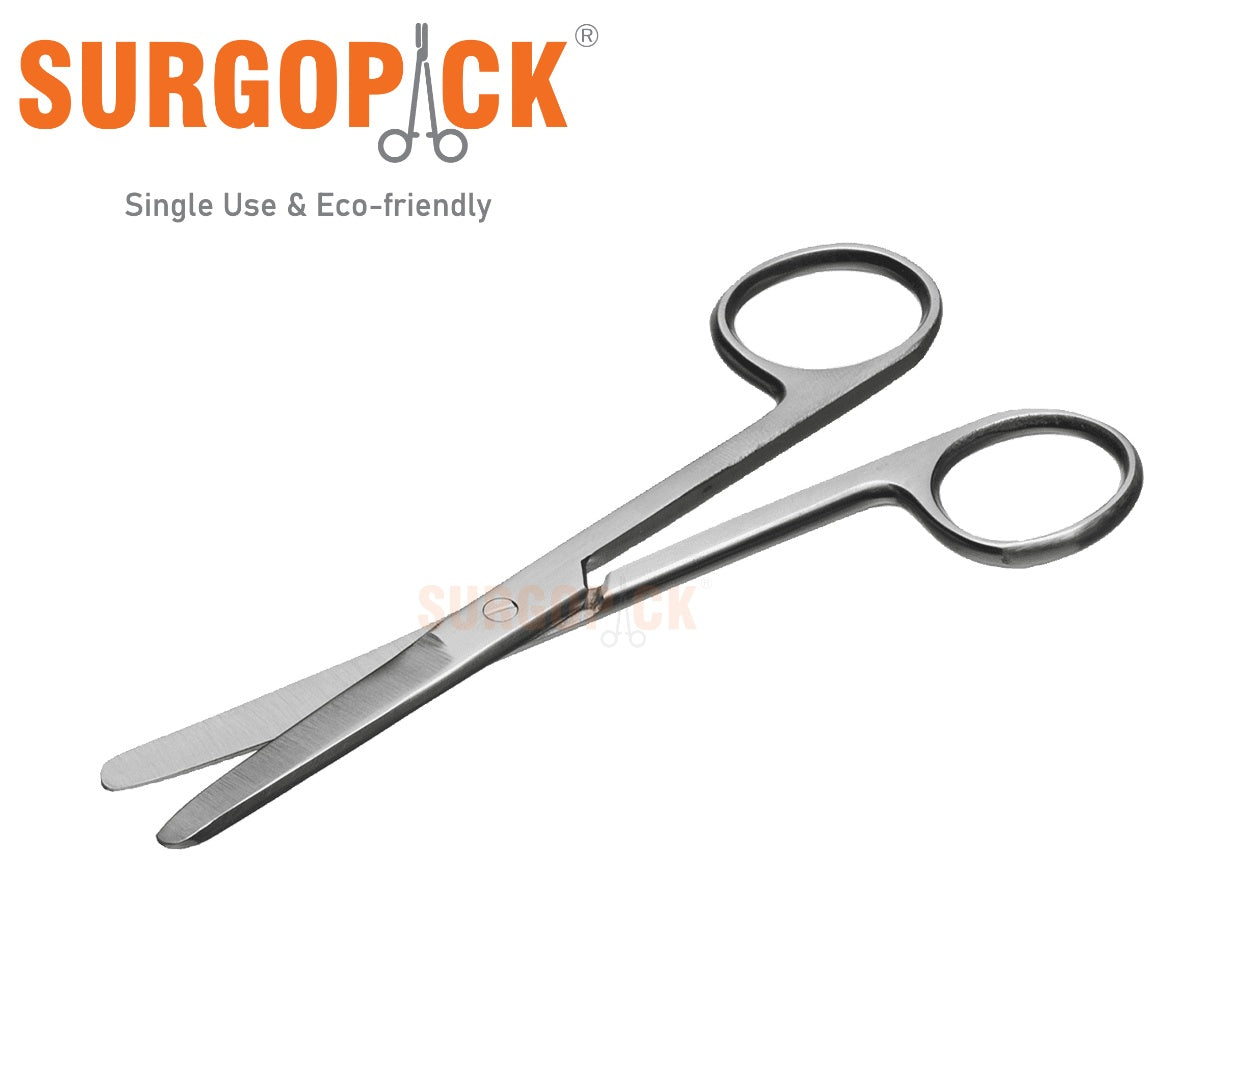 Box 50 Surgopack® Sterile Single Use Dressing Scissors Blunt Blunt 13cm / 5" Individually Packed - EmpireMedical 